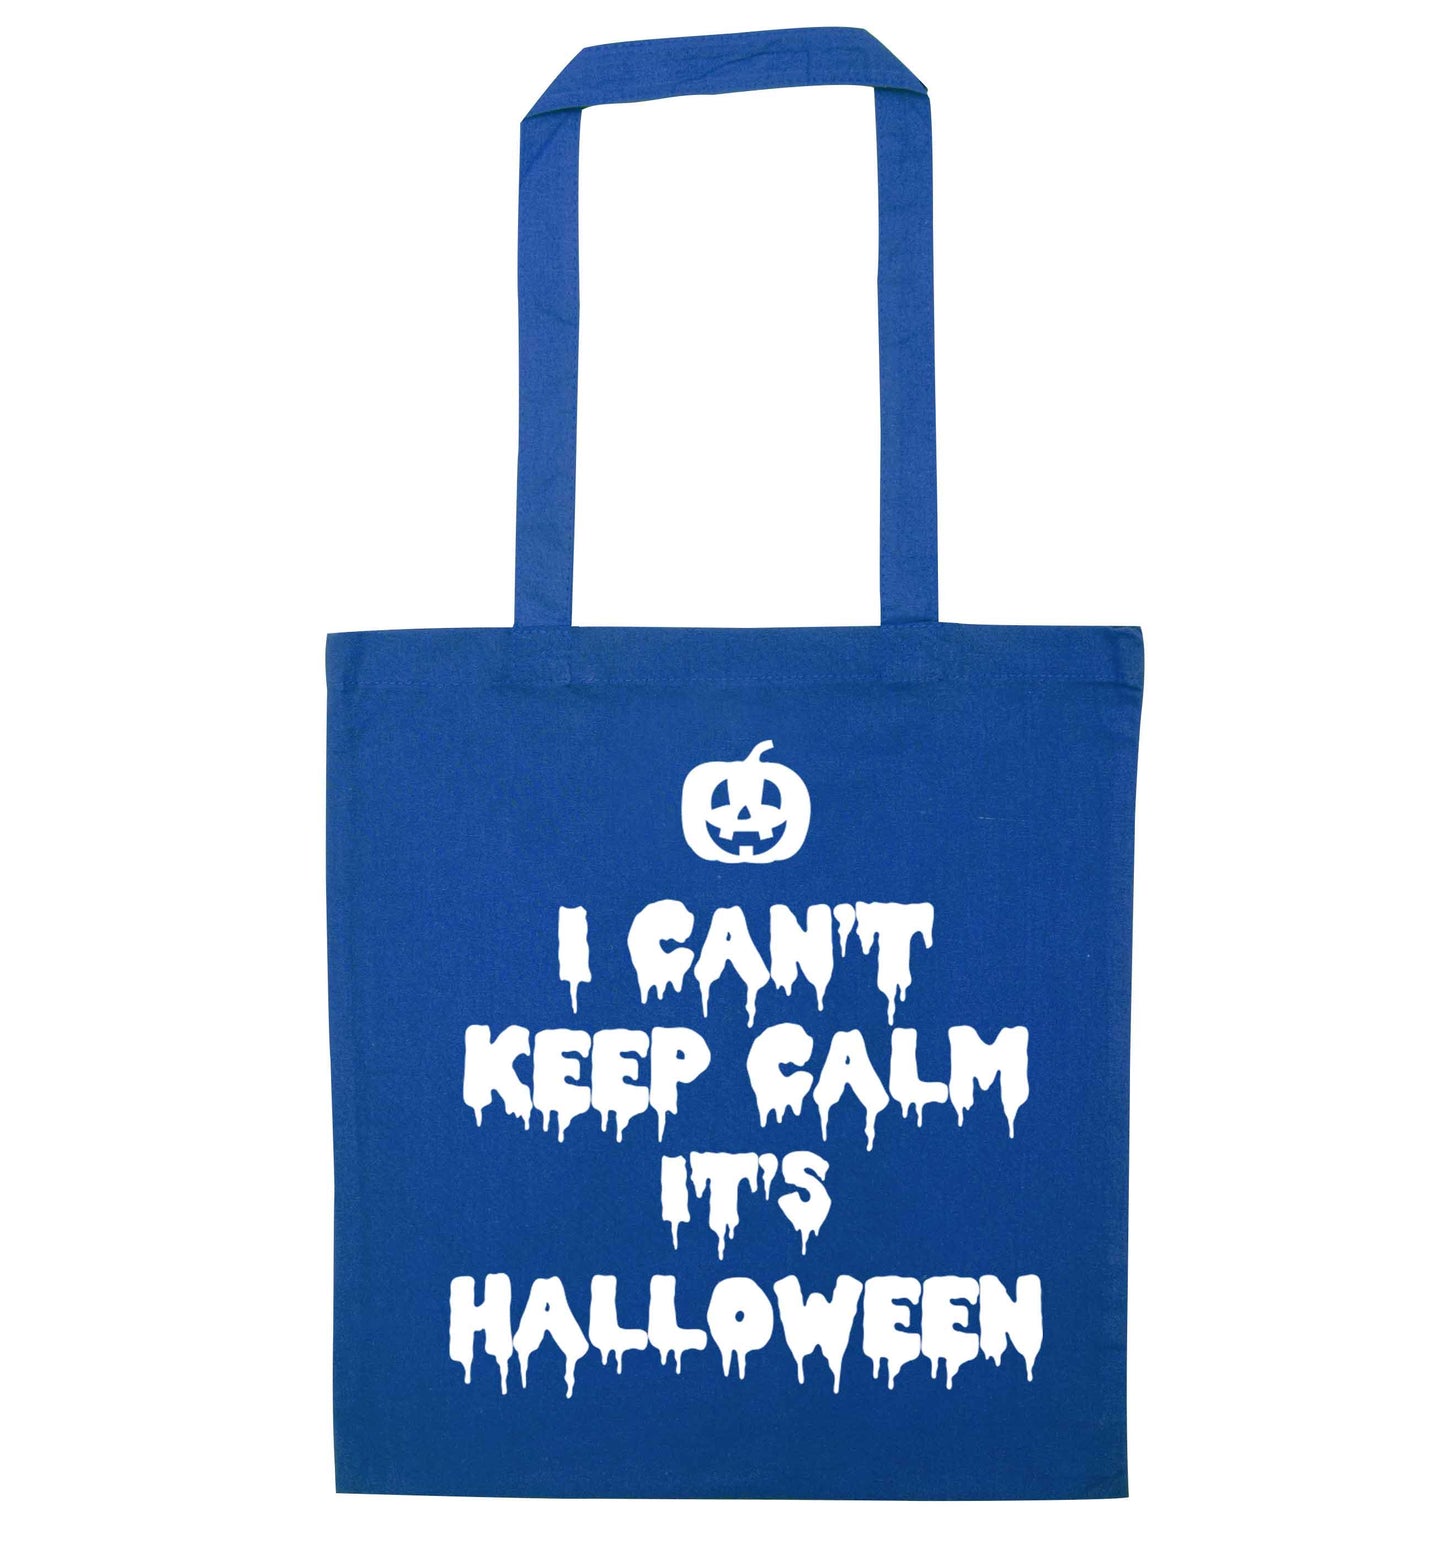 I can't keep calm it's halloween blue tote bag